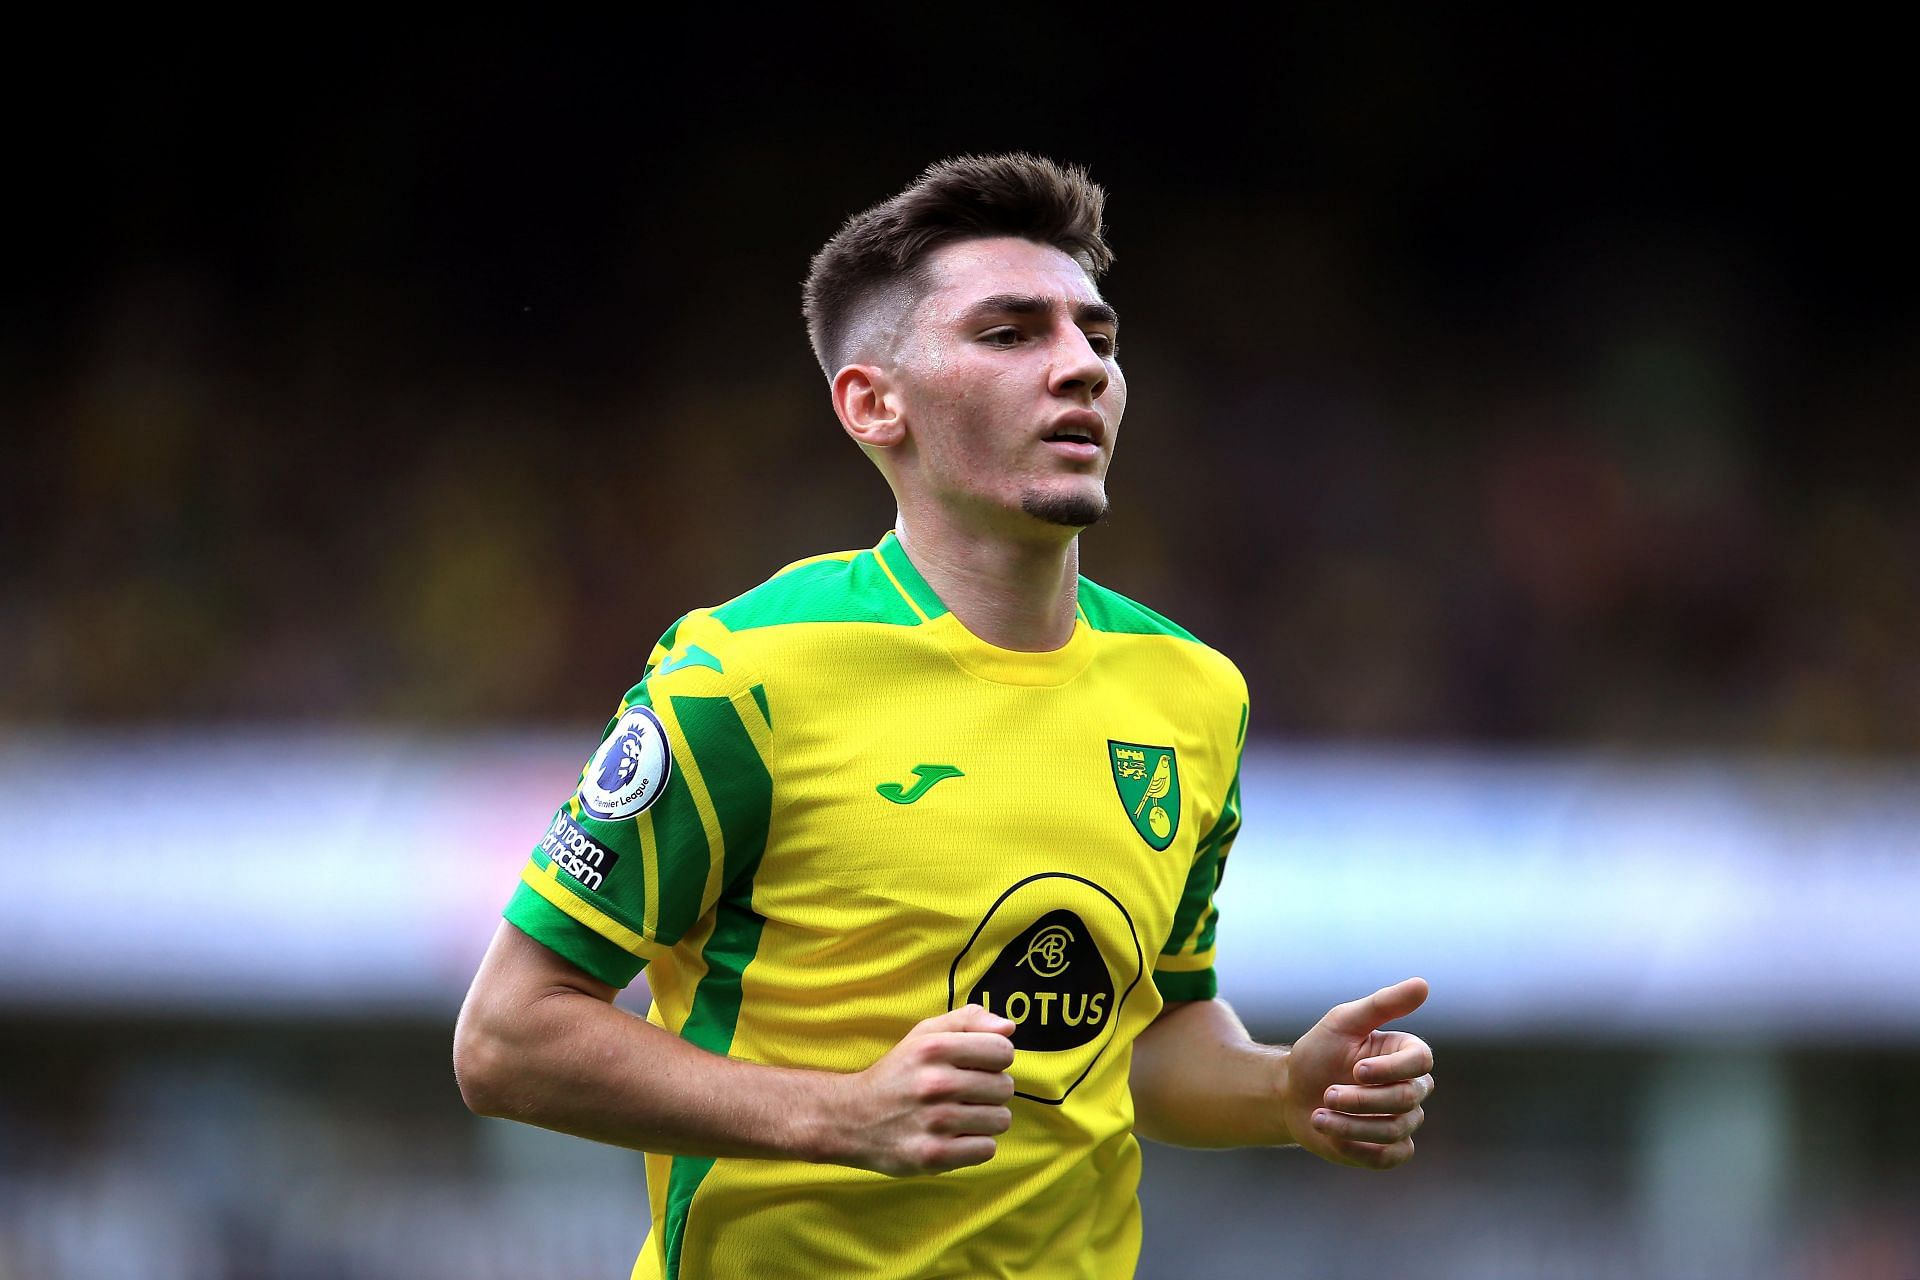 Chelsea might be forced to recall Billy Gilmour from his loan spell with Norwich City.